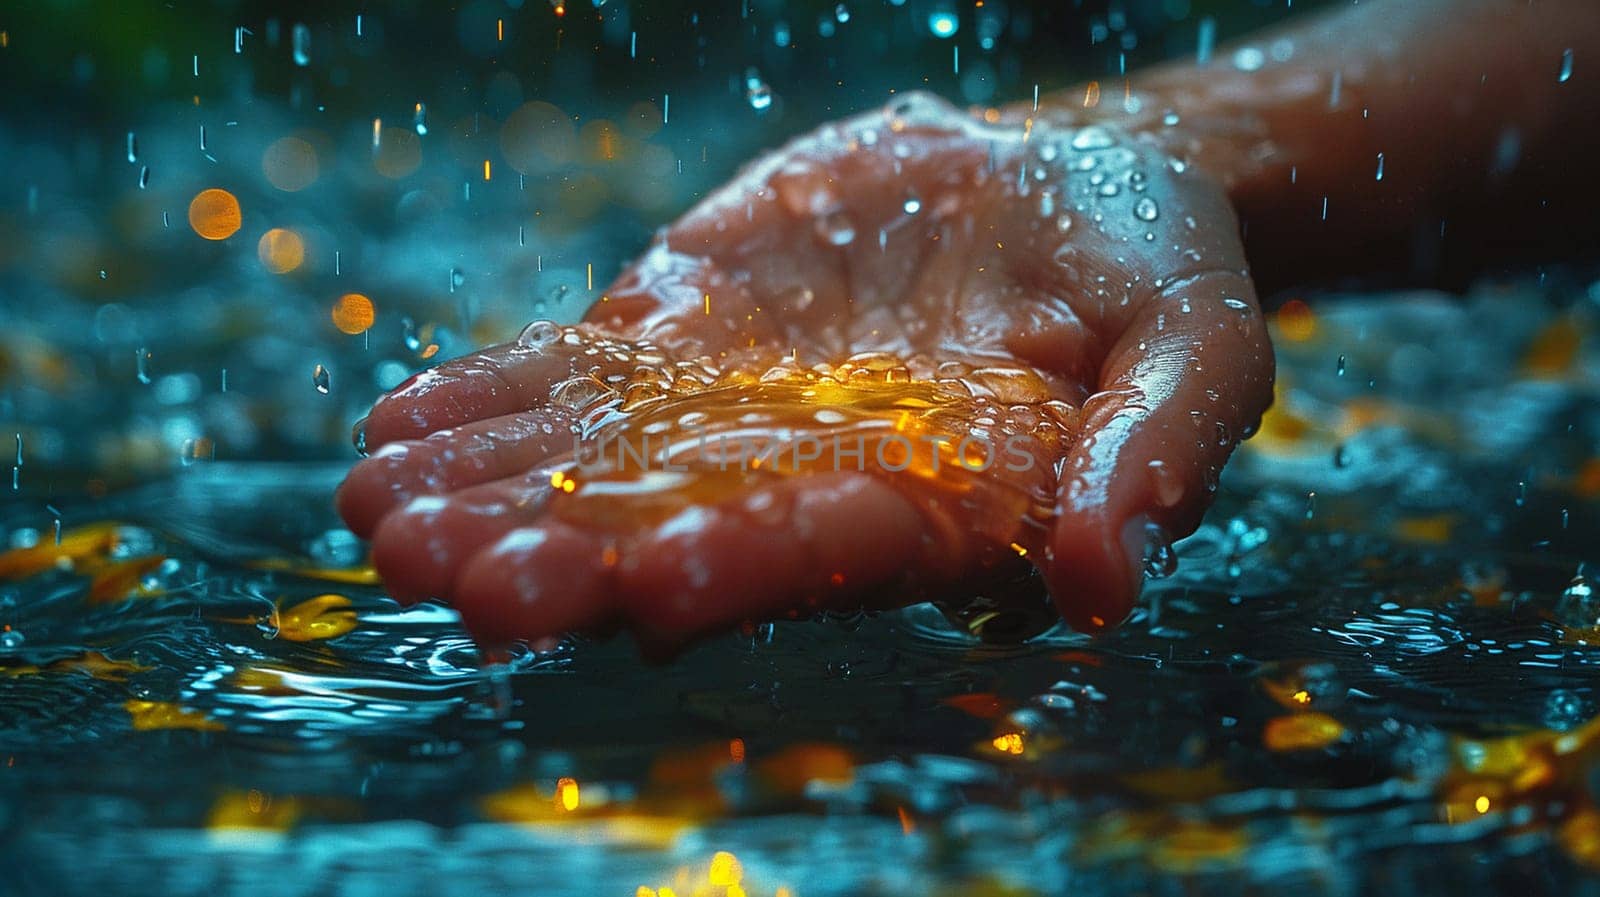 Hand reaching out to touch raindrops by Benzoix